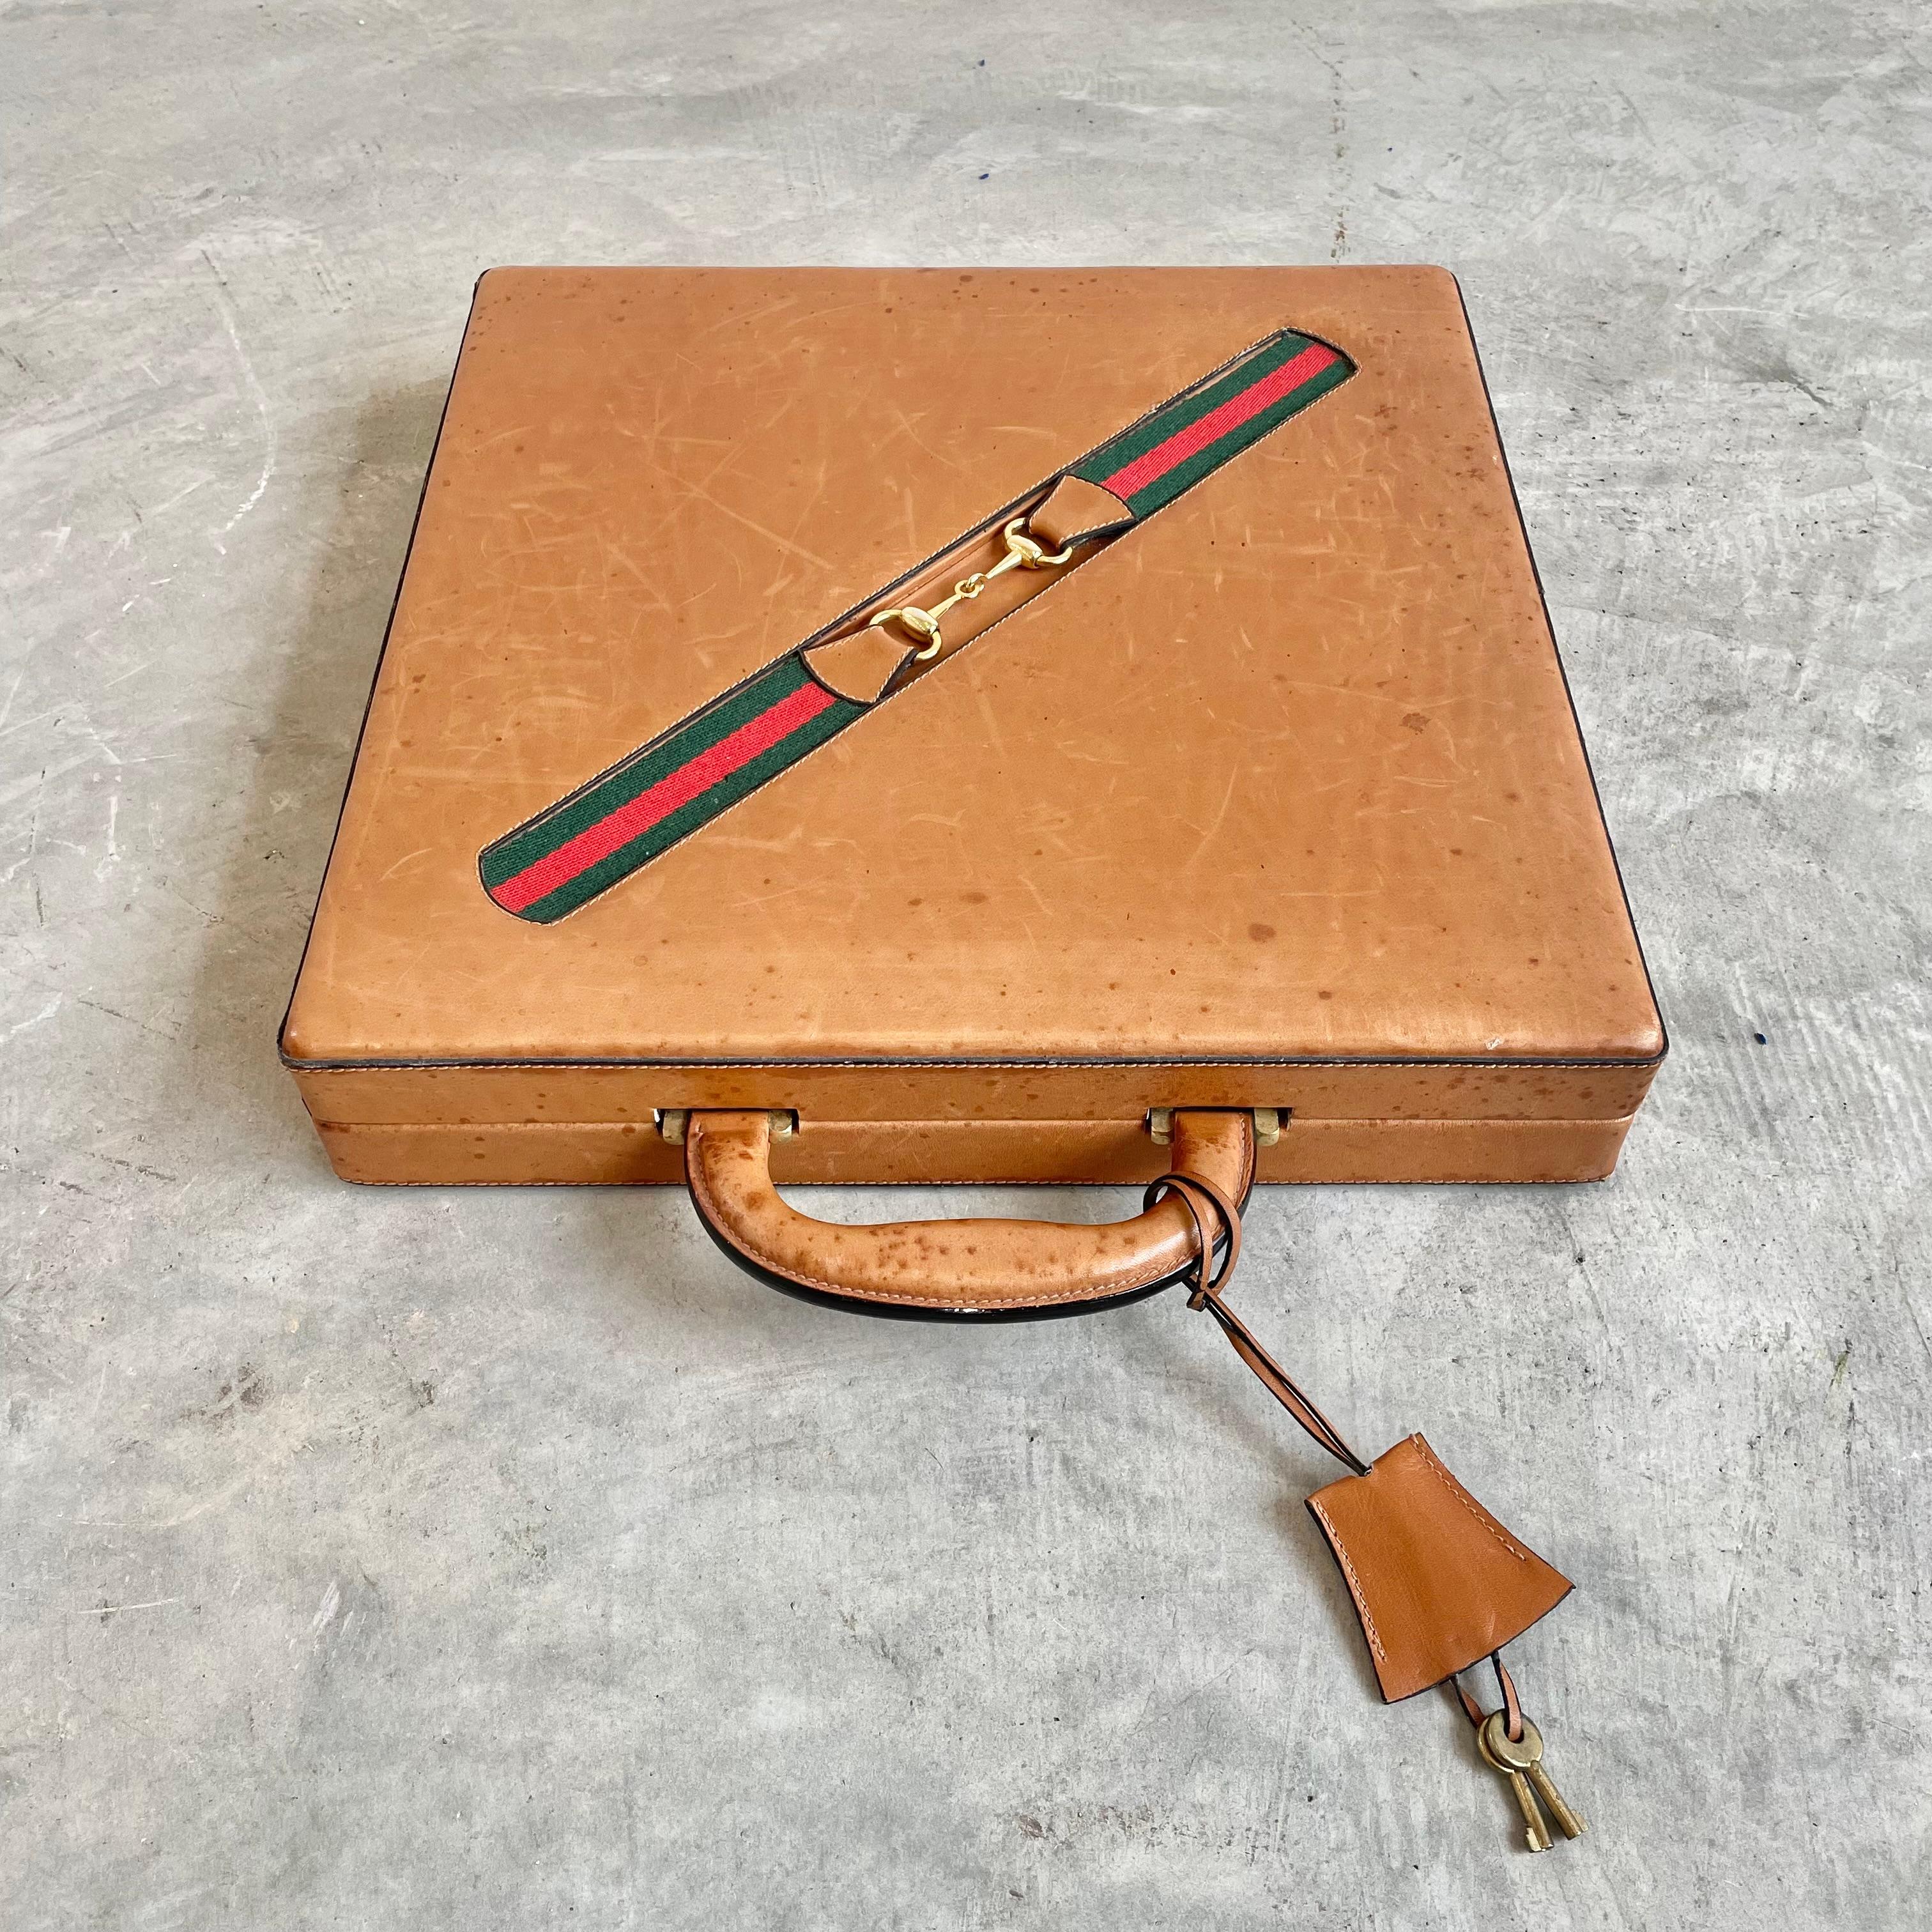 Vintage portable Gucci leather game case with chess, checkers, poker and dominoes. Wood framed case wrapped in elegant saddle leather with the iconic Gucci red and green strap across the front and fastened in the middle with a classic Gucci horse